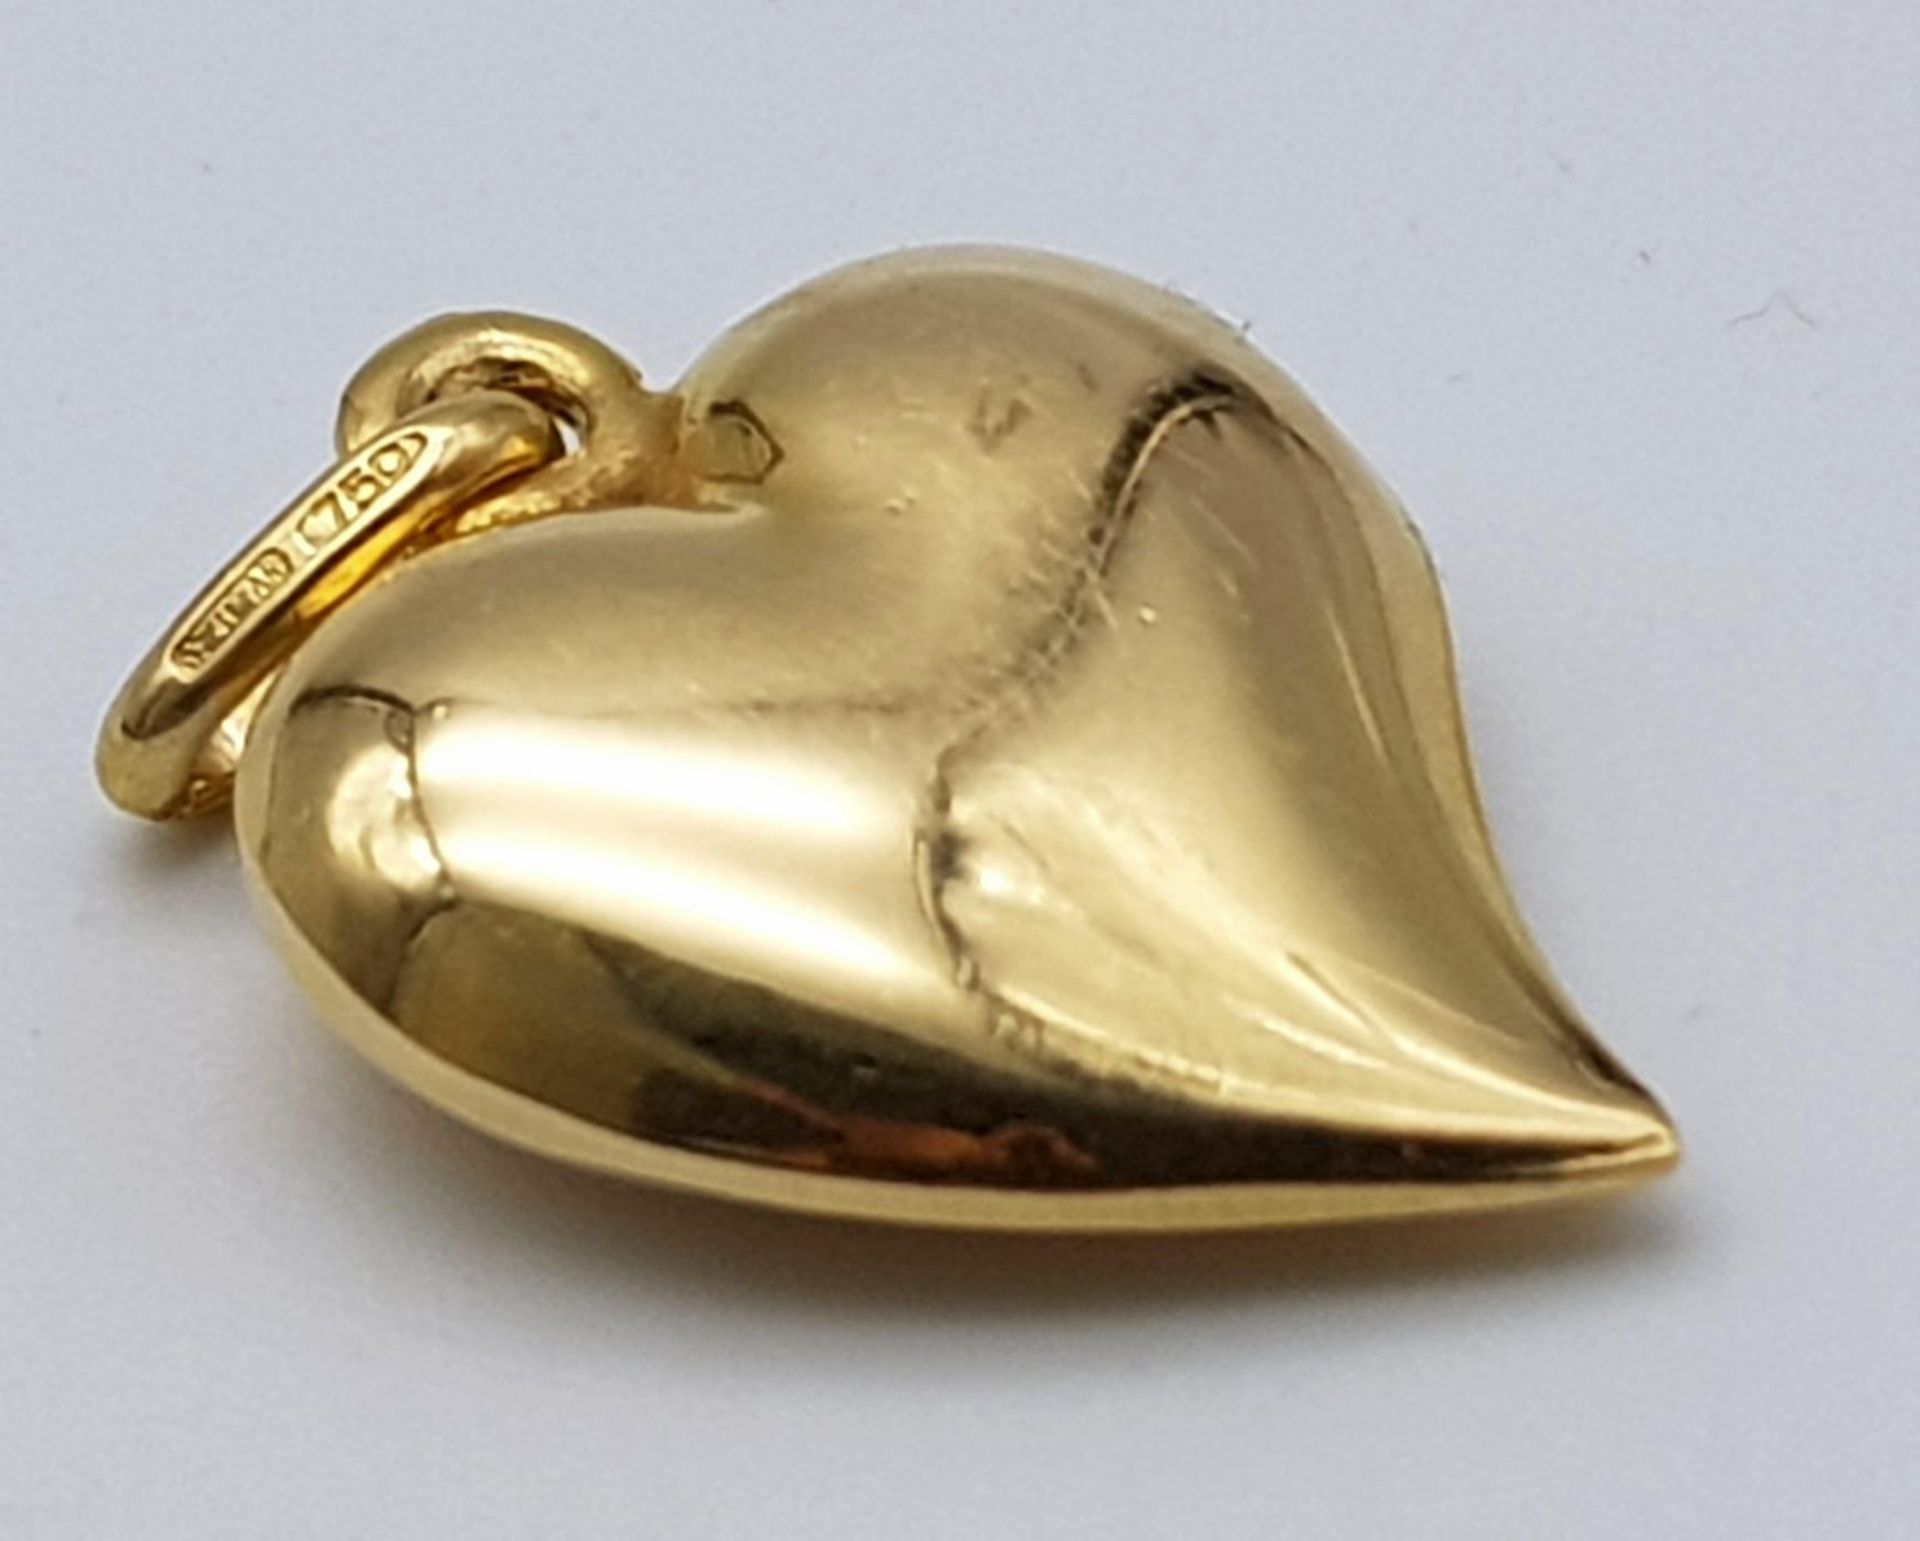 An 18K Yellow Gold Heart Pendant/Charm. 2.5cm. 2.75g weight. - Image 2 of 4